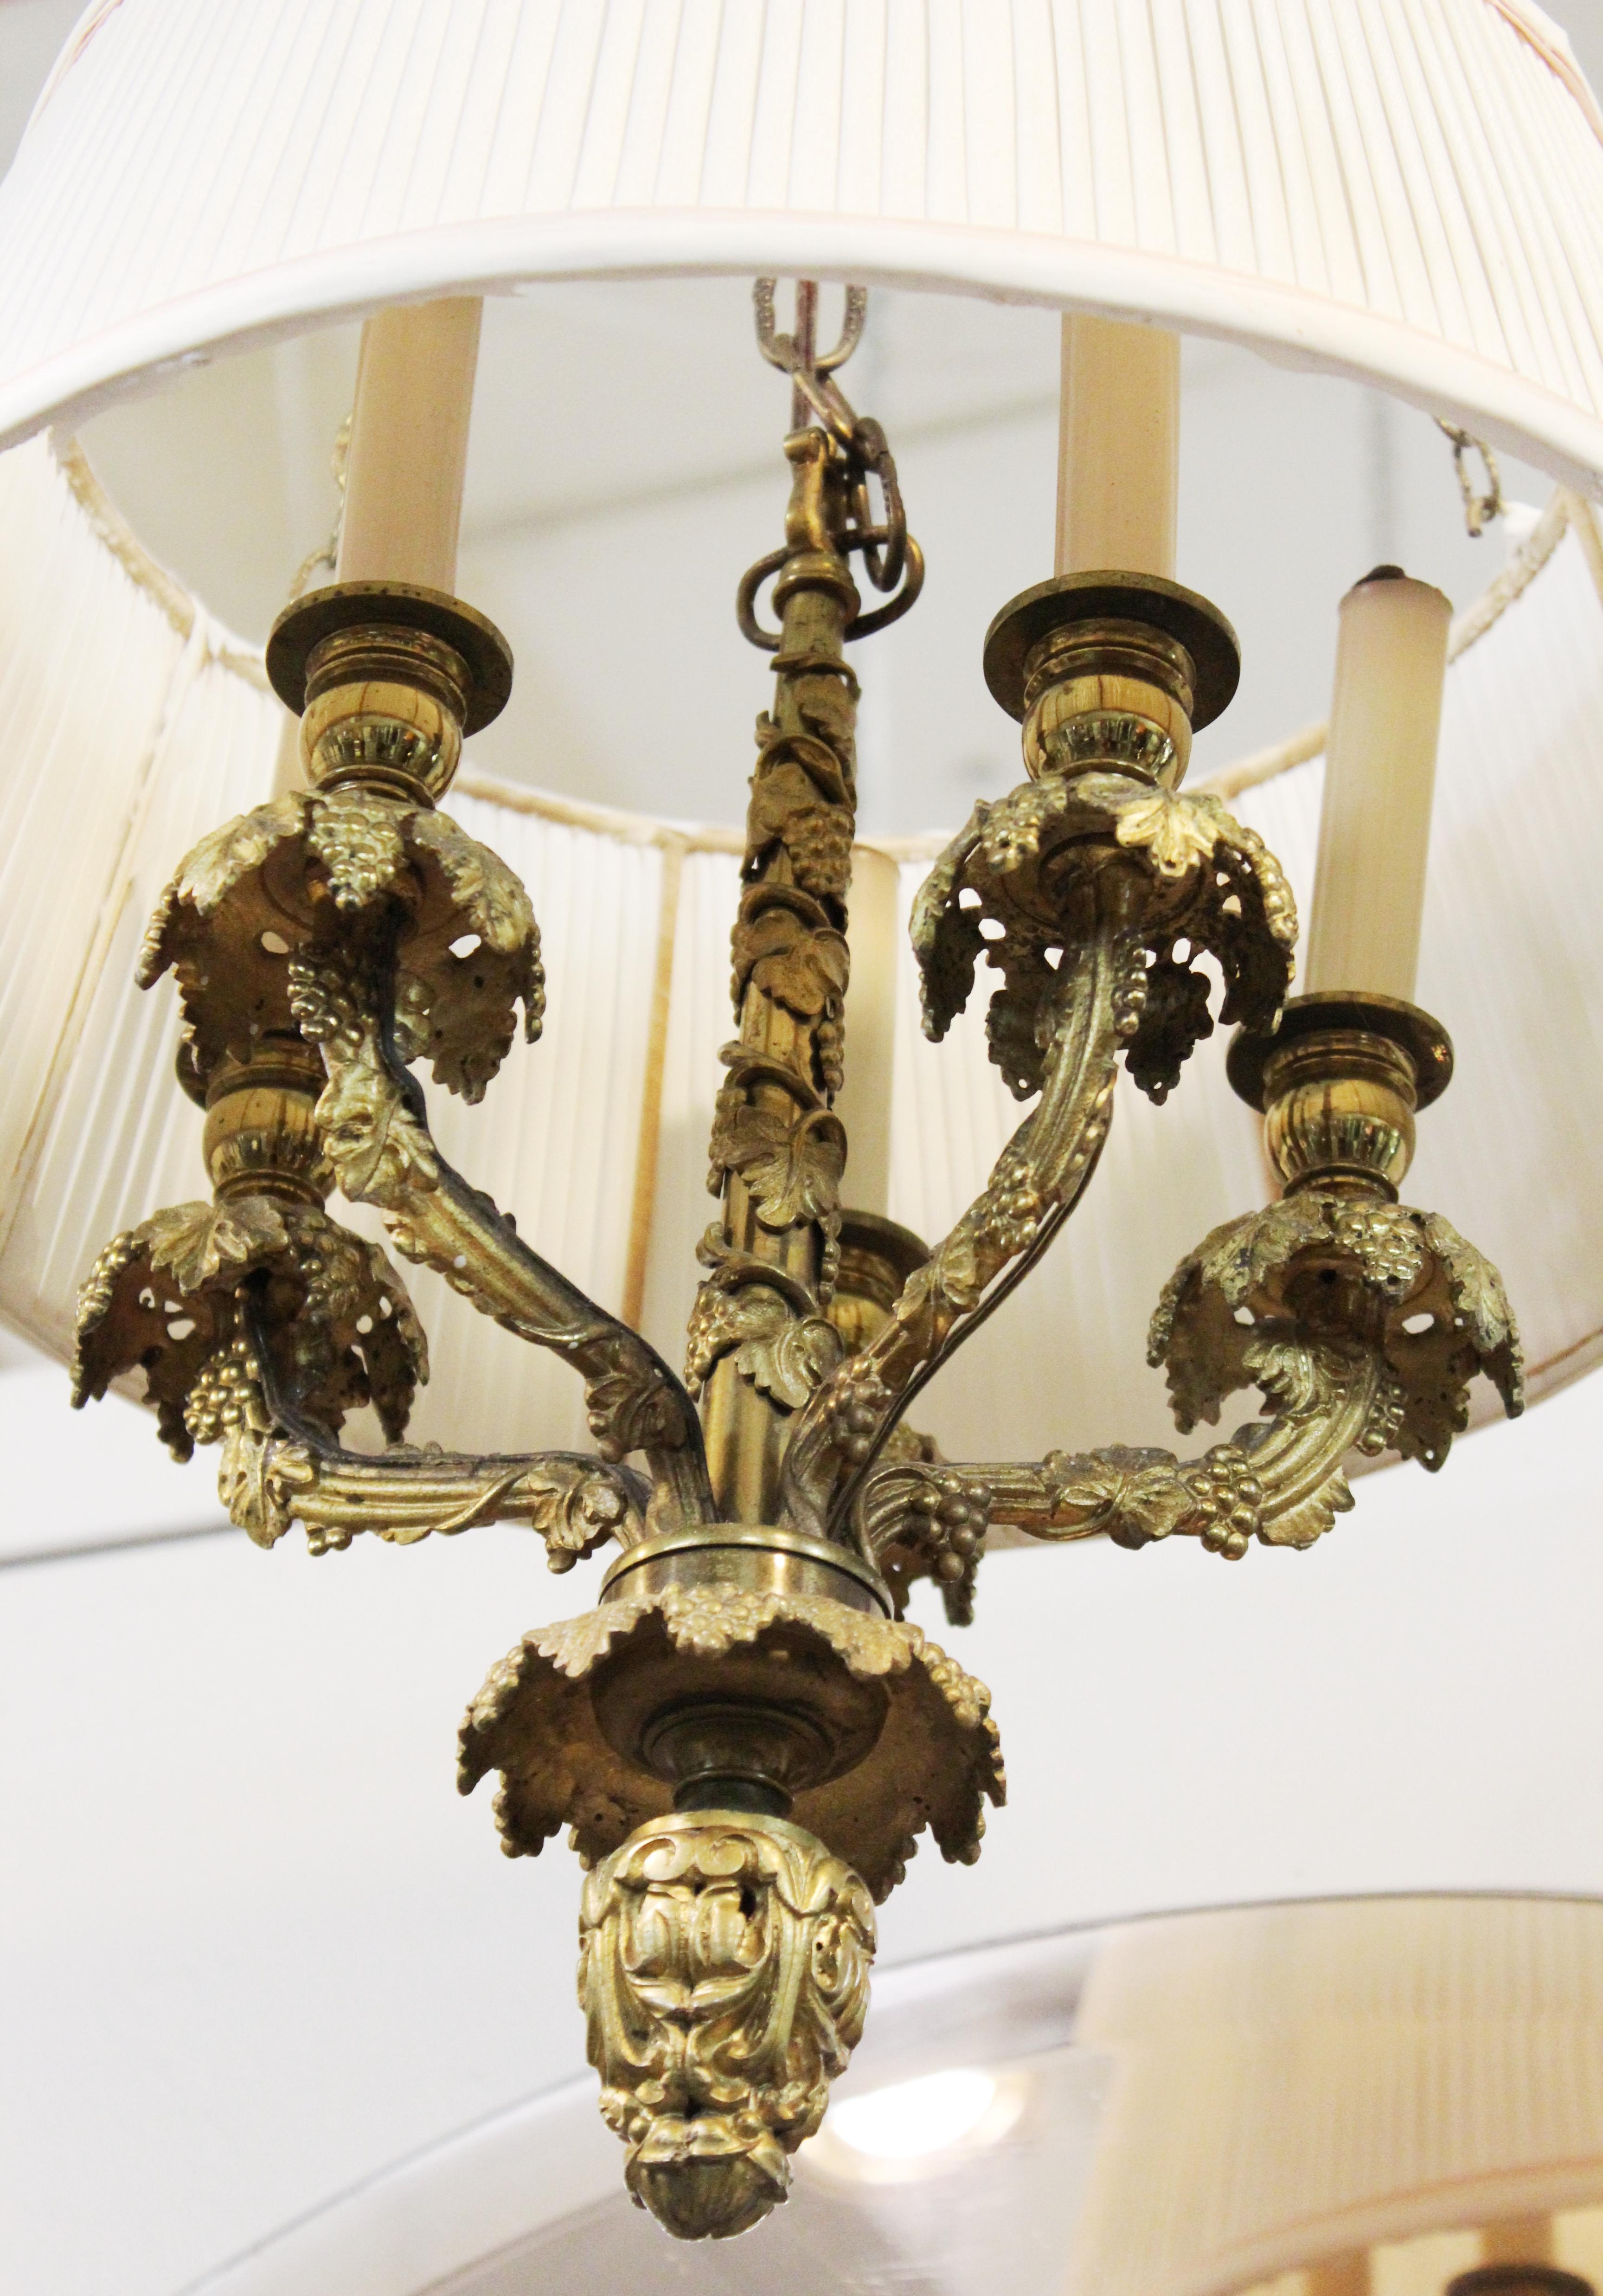 19th Century Neoclassical Revival Gilt Bronze Chandeliers With Grapevines Motif